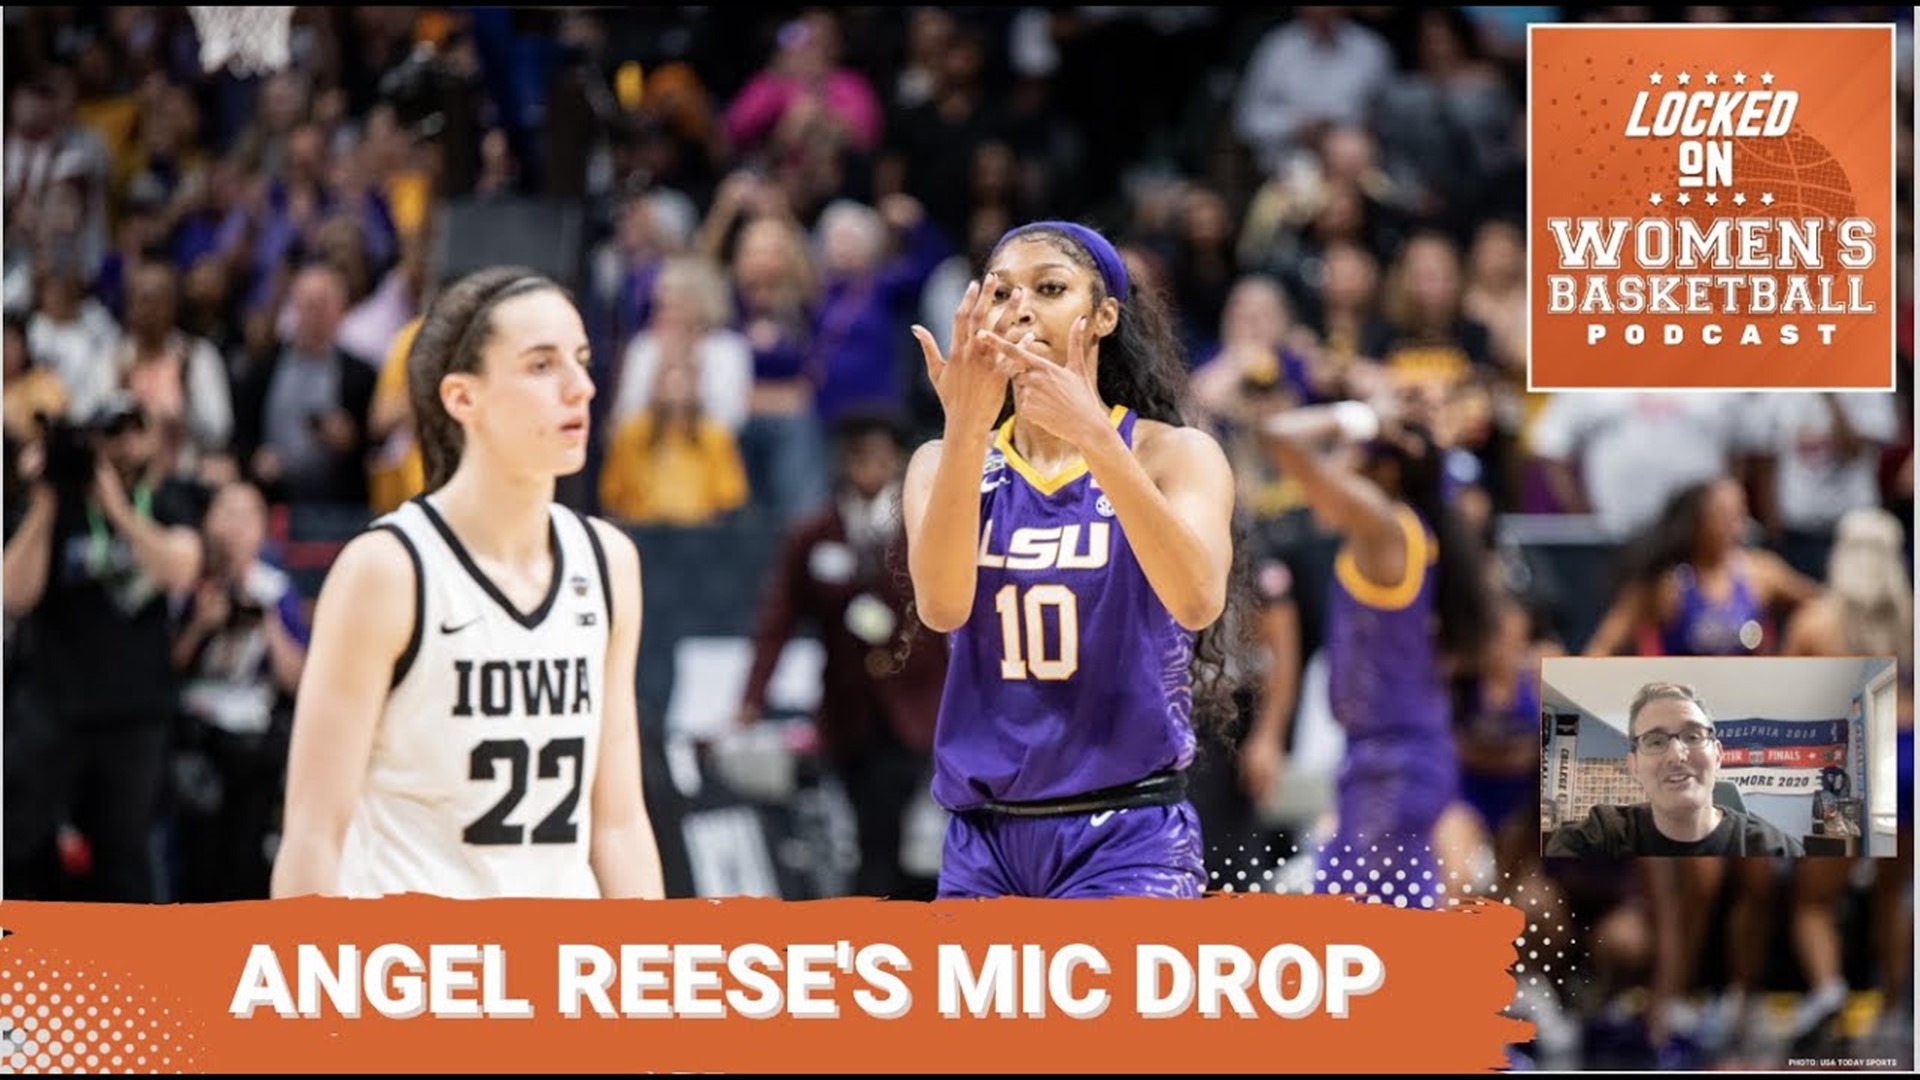 A 102-85 win for LSU gave the Tigers the title over Caitlin Clark and Iowa, and Angel Reese punctuated the performance with some on-court celebrating.